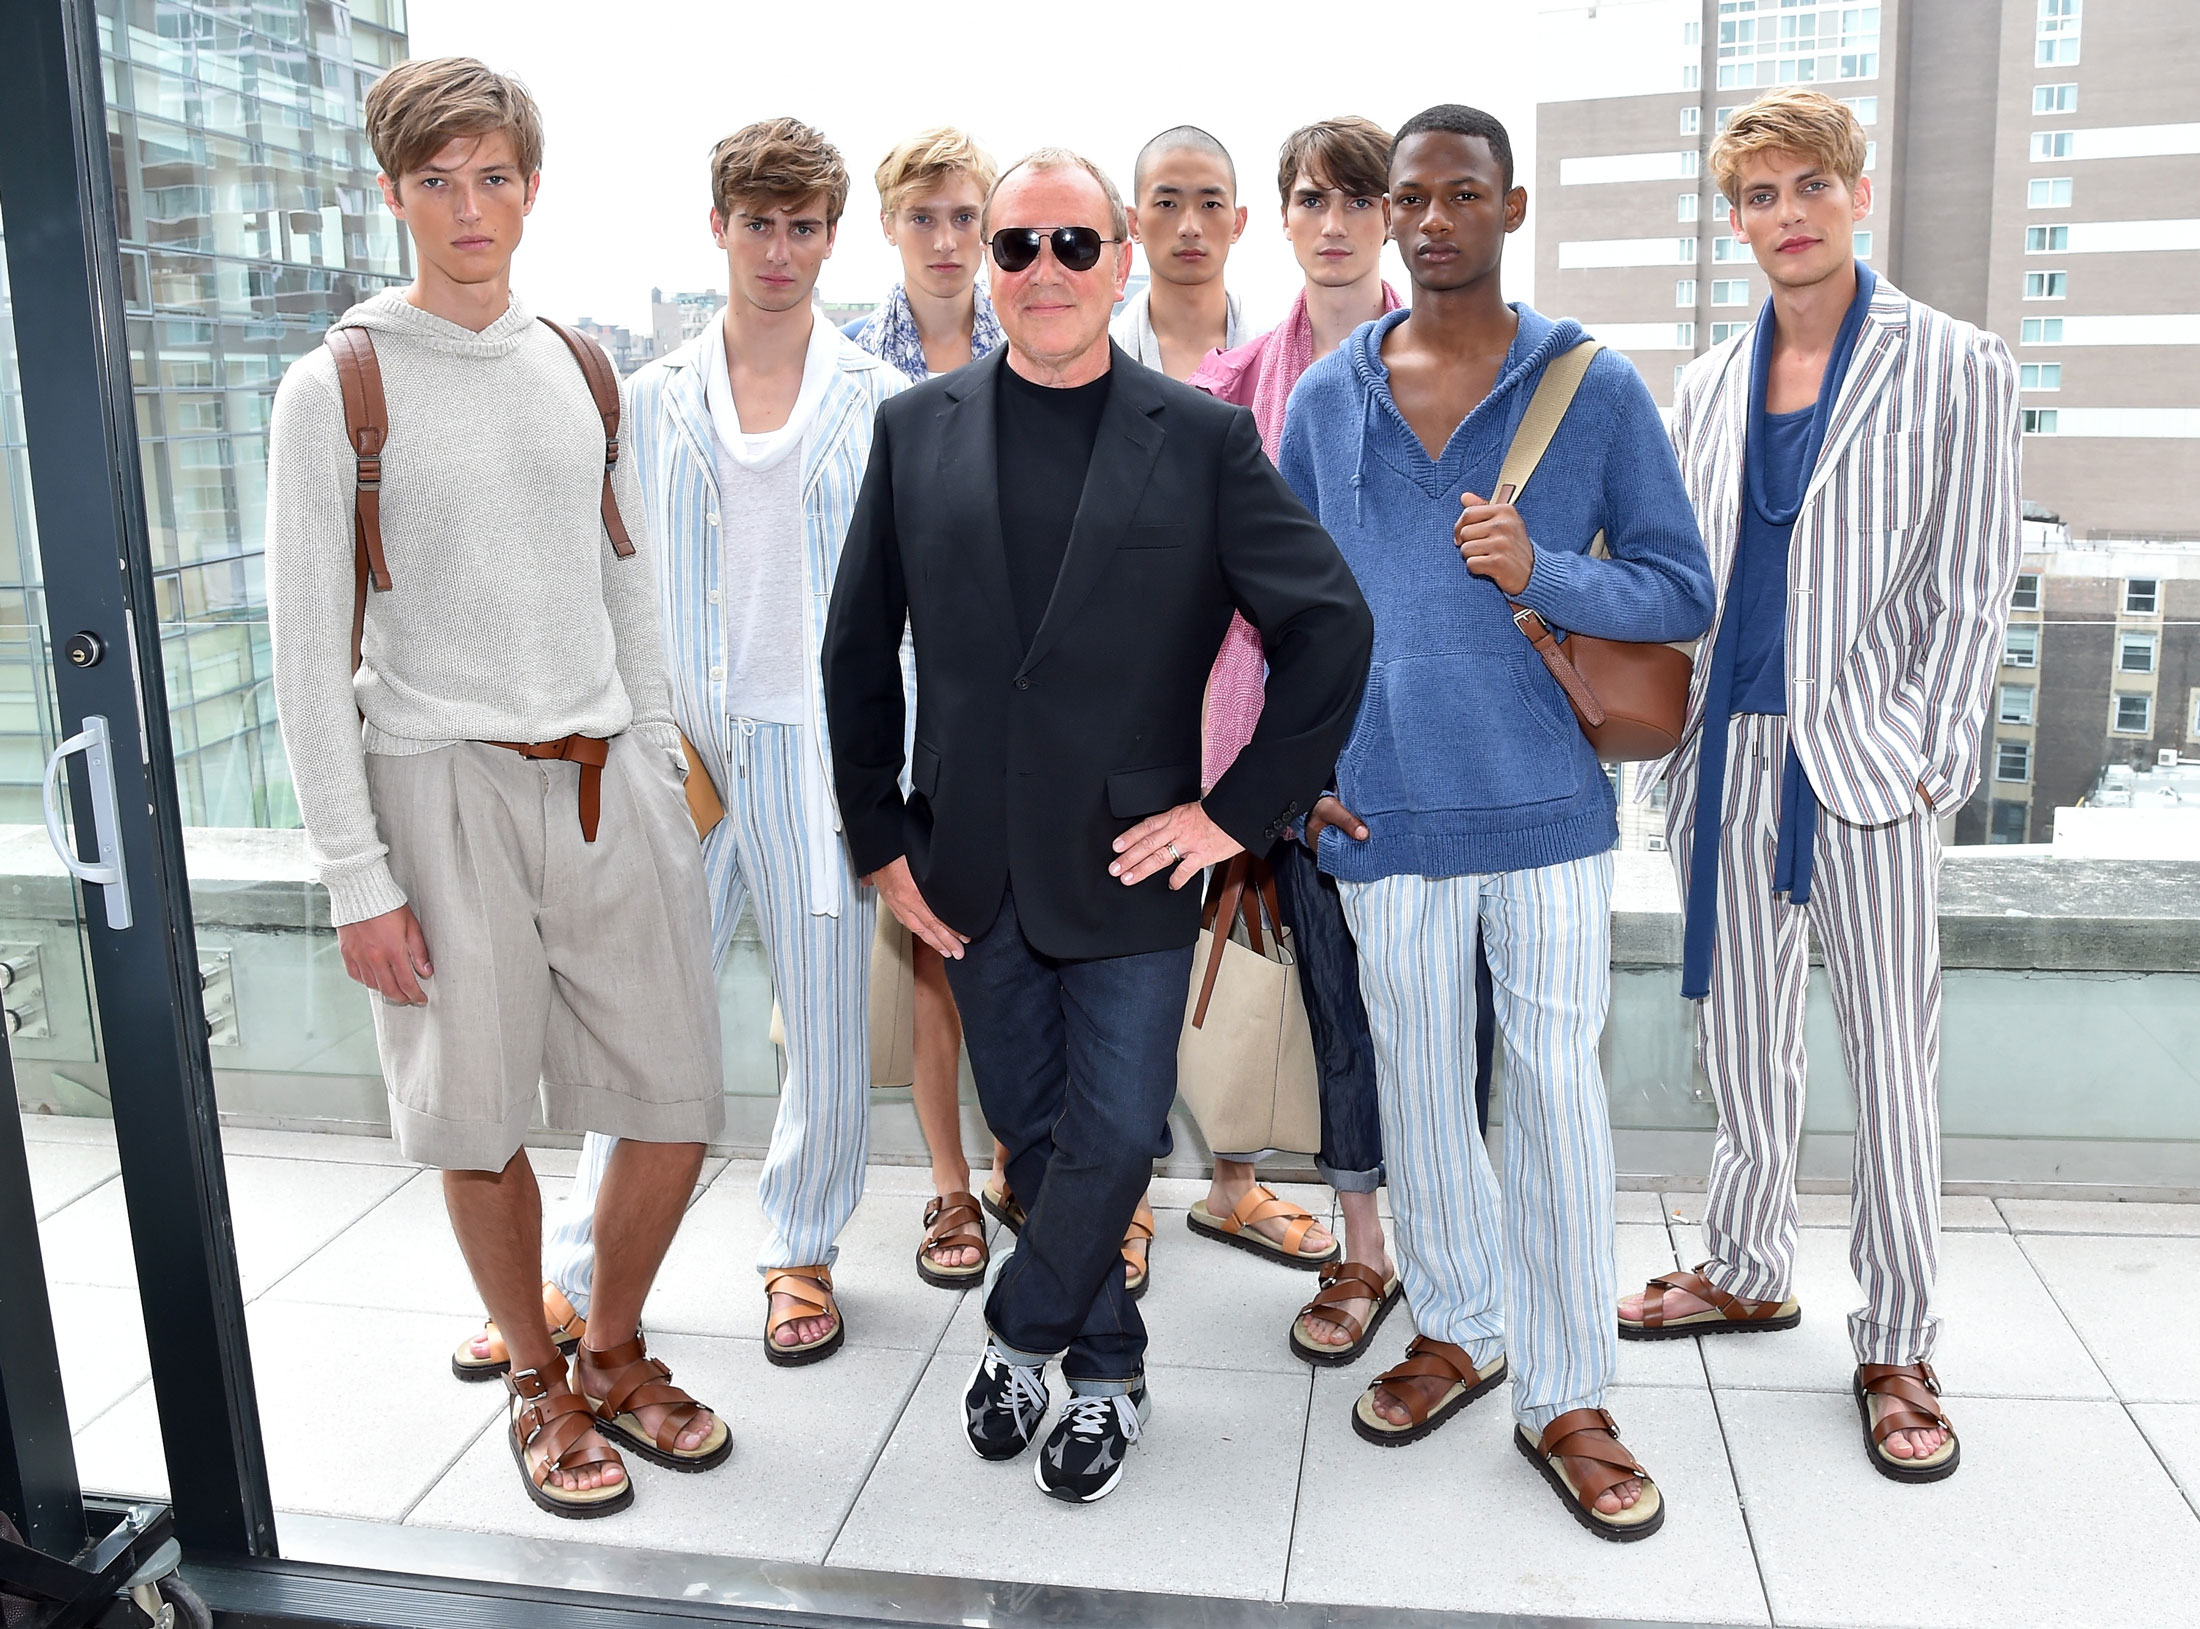 CEO of Michael Kors Owner (CPRI) Says Prices Will Go Up